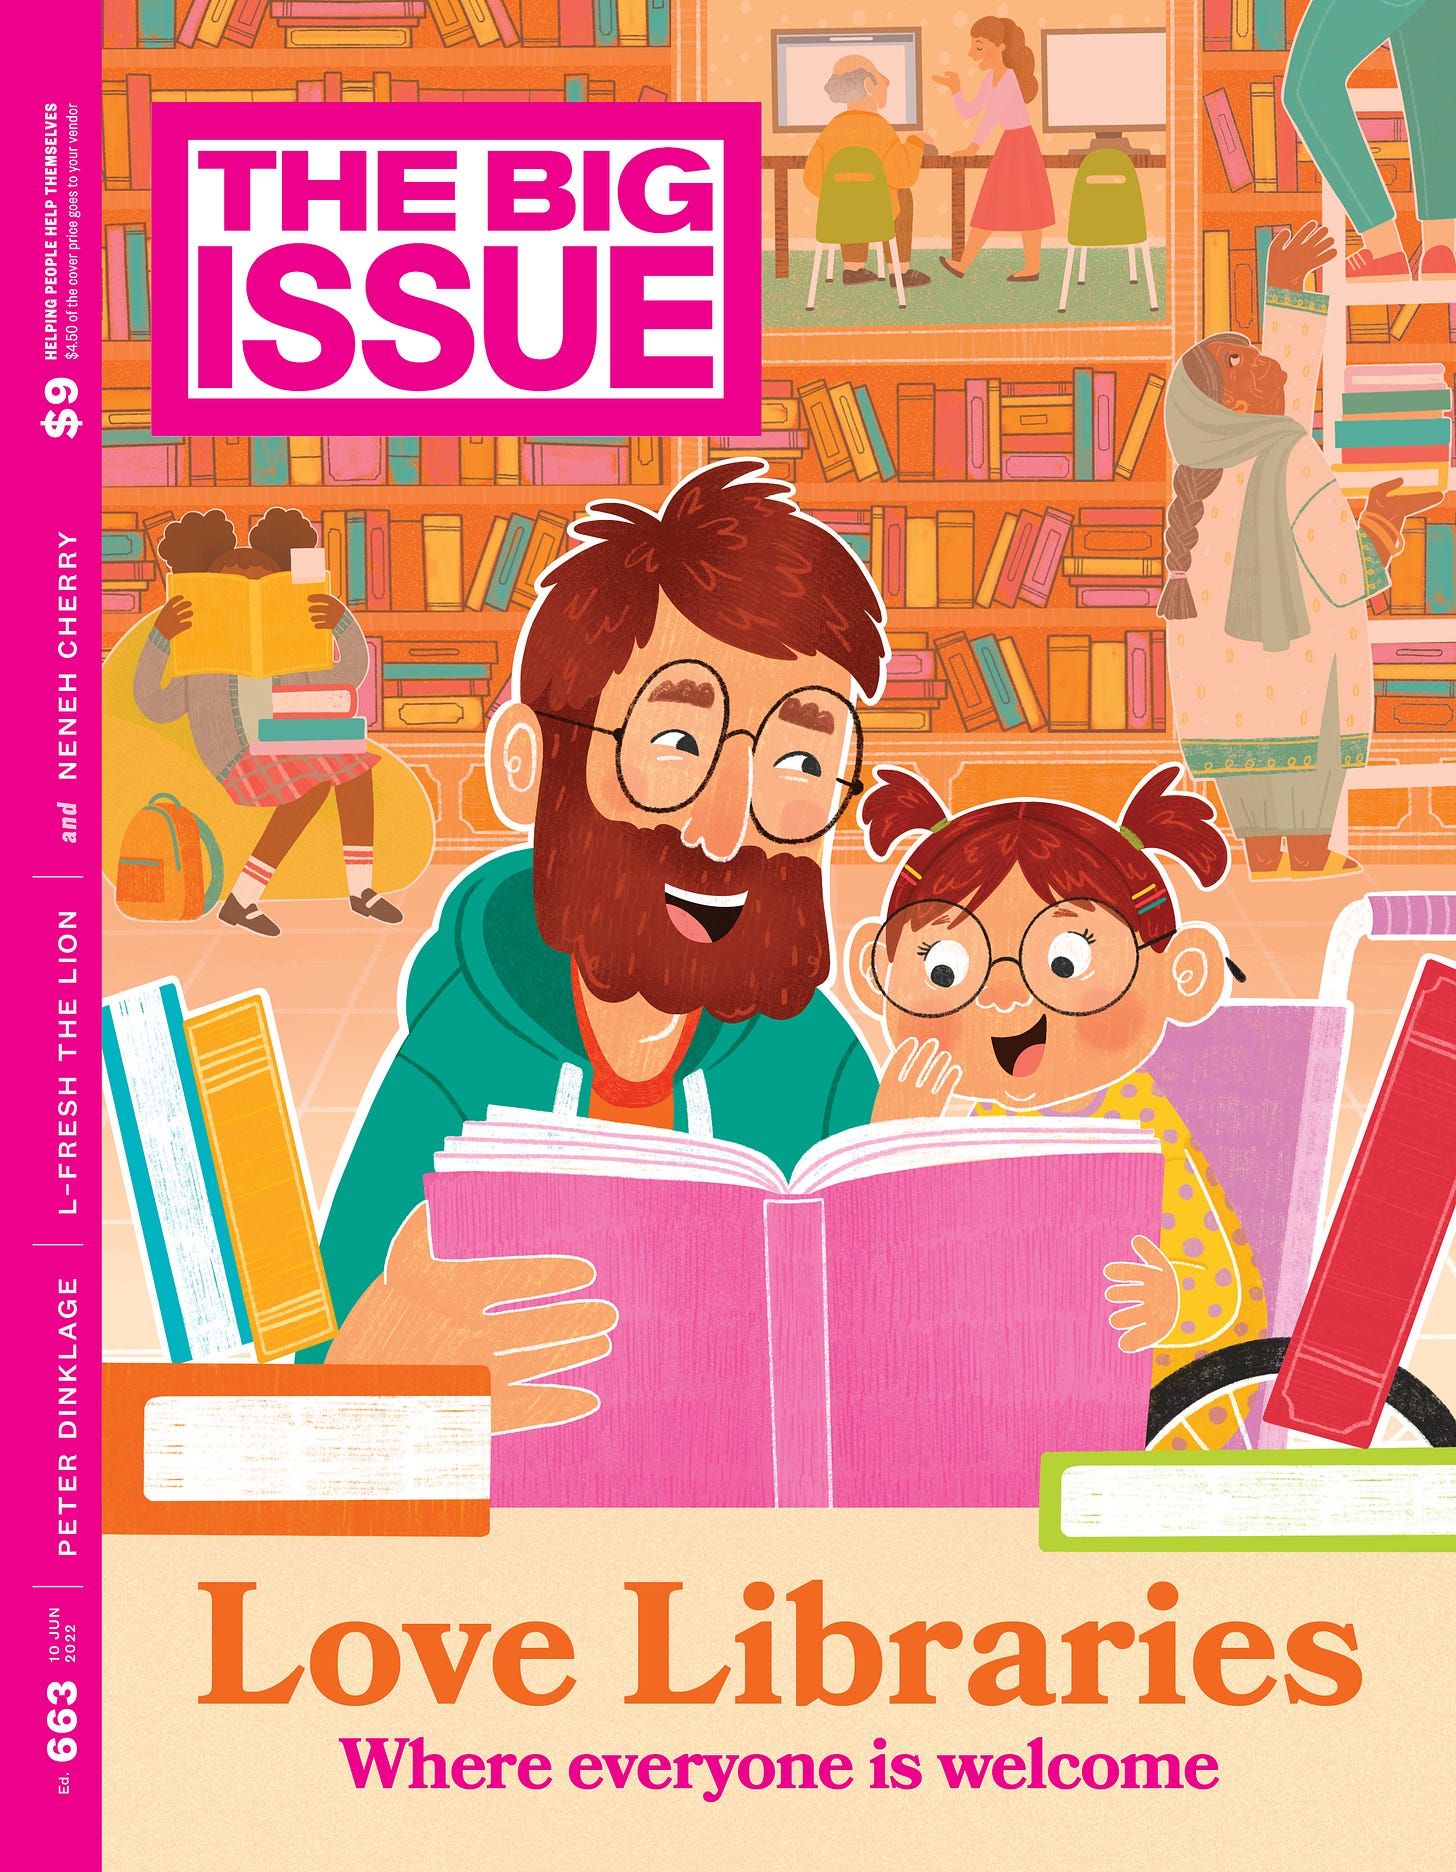 The cover of The Big Issue, edition 663 with an illustration of a bearded person and a child with pig tails happily reading a book. In the background are other patrons at the library reading, using computers and getting books from high shelves. Large text at the bottom reads 'Love Libraries' and 'Where everyone is welcome'. 